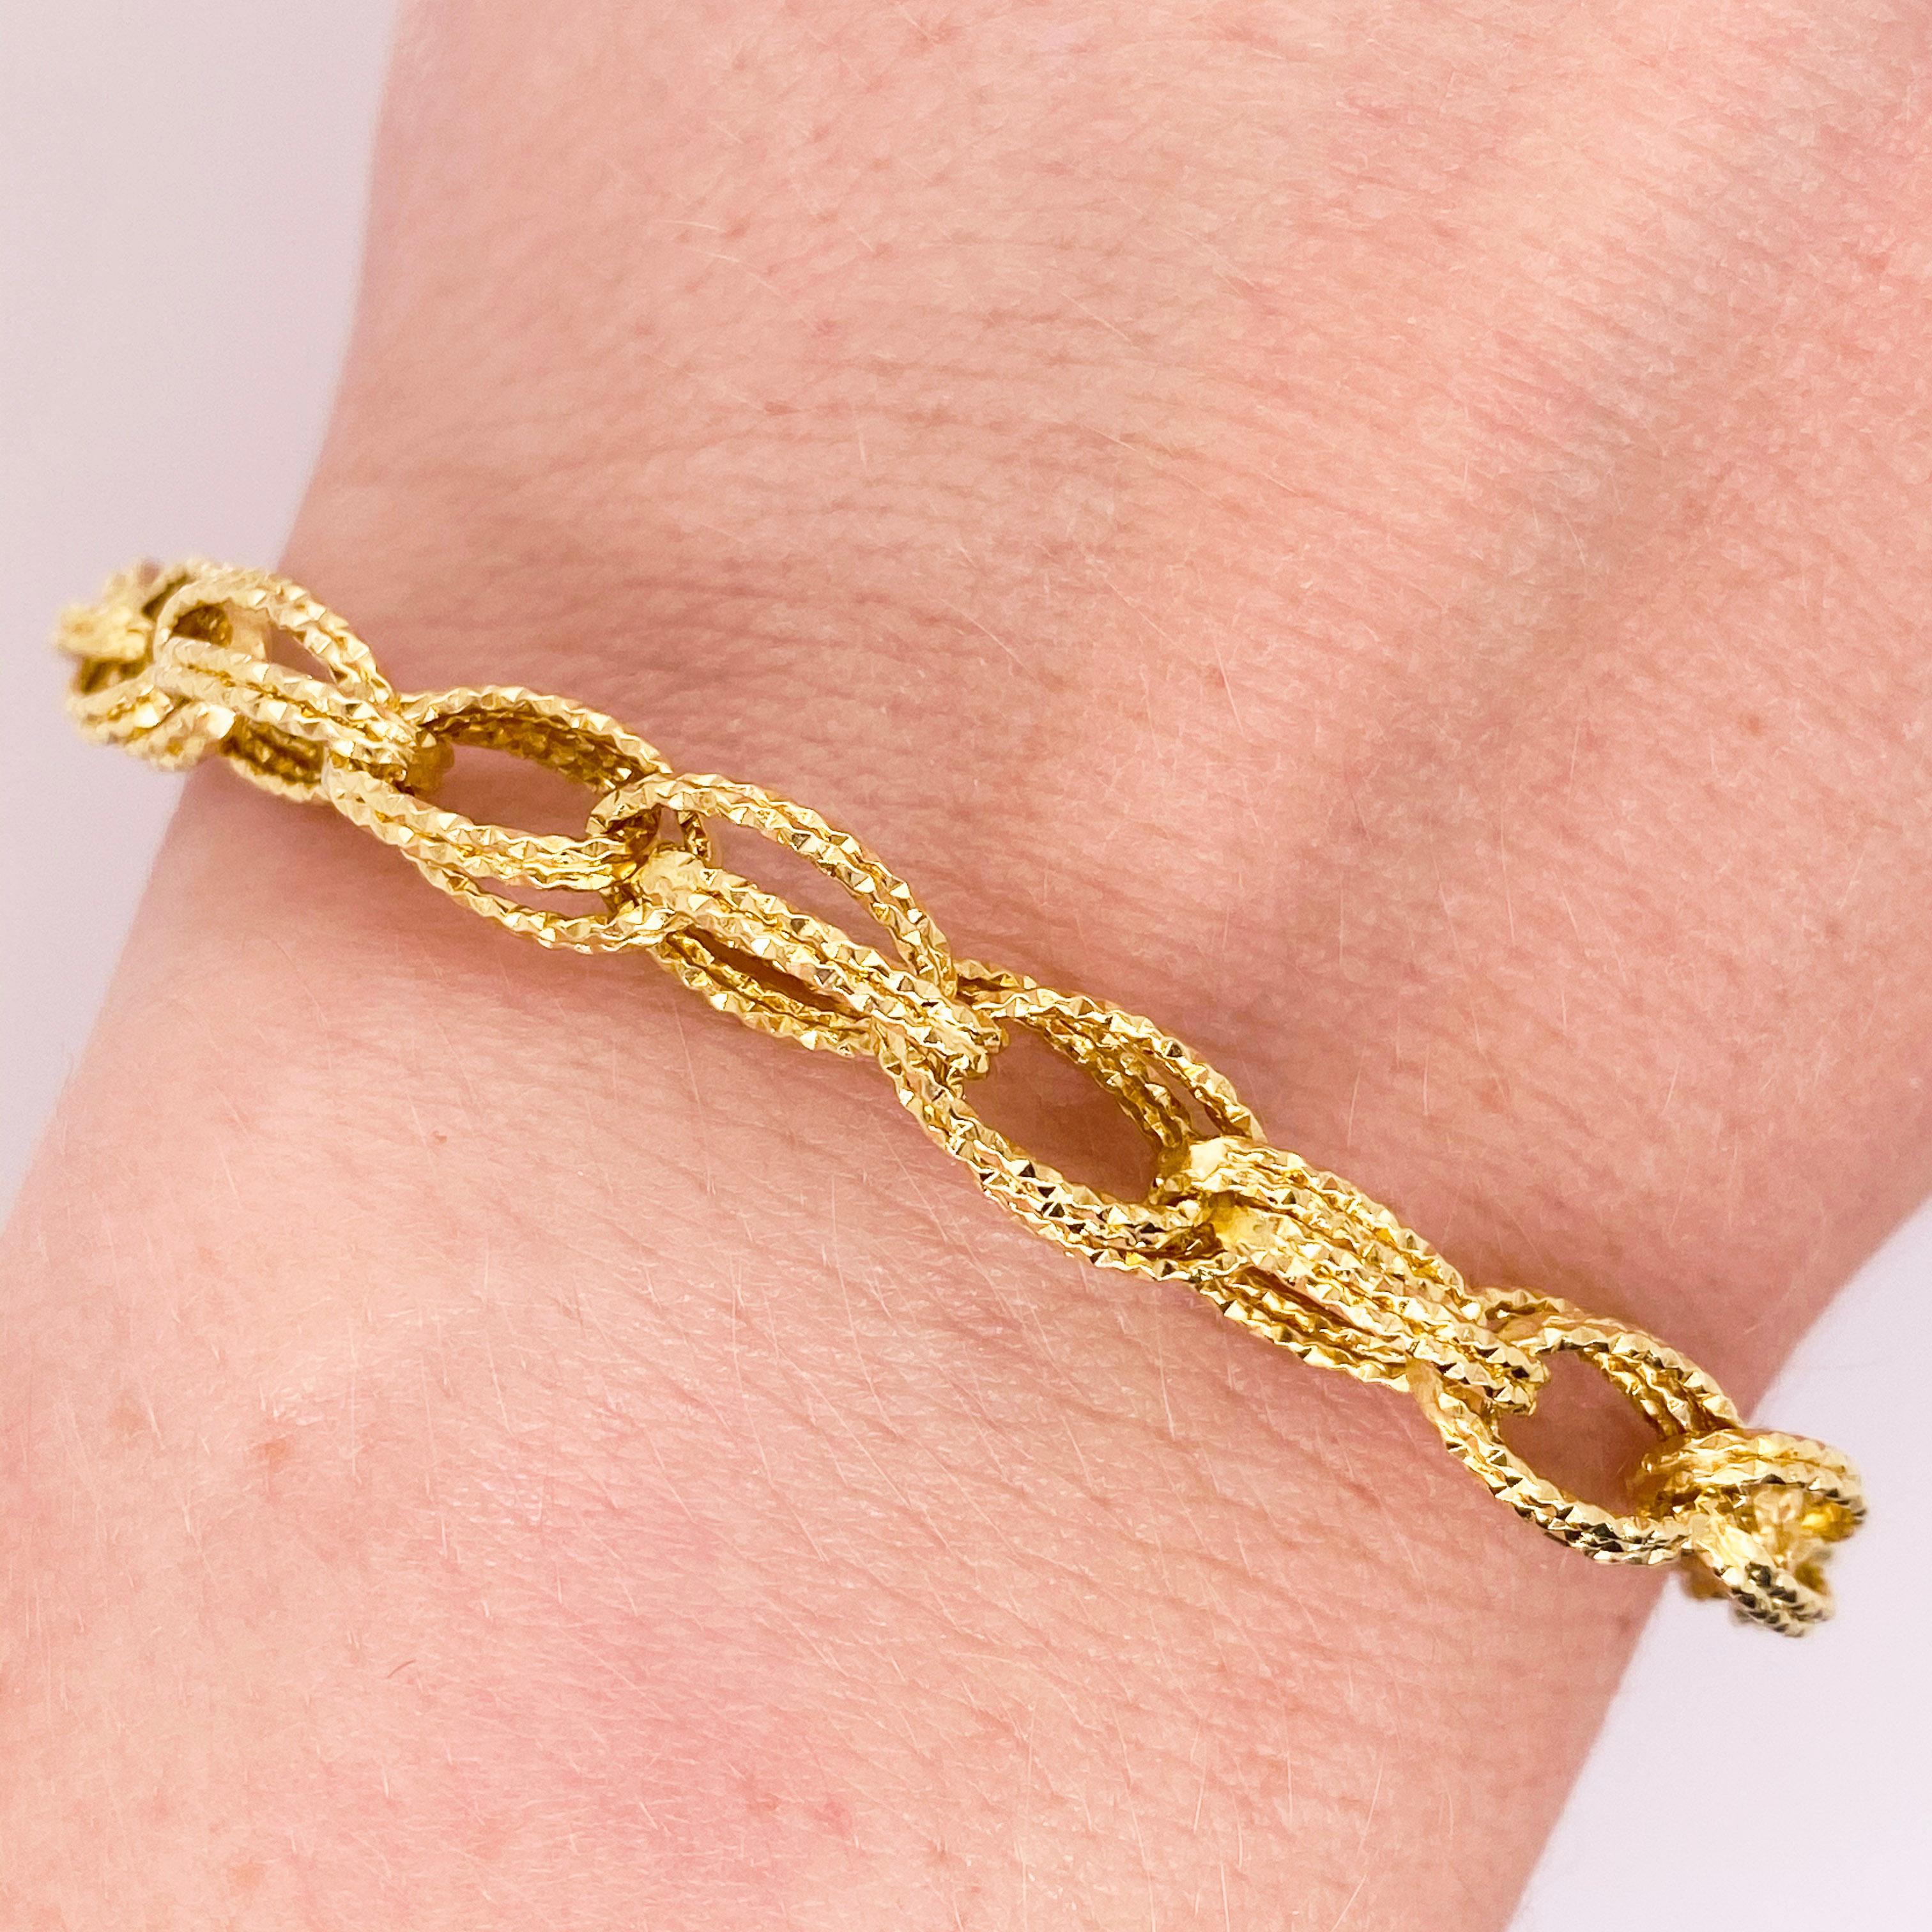 This 14k yellow gold bracelet matches everything and is the perfect addition to any outfit, casual or formal. This link bracelet is a large cable that has been diamond cut so it shimmers at each angle.  This bracelet would make the perfect gift for